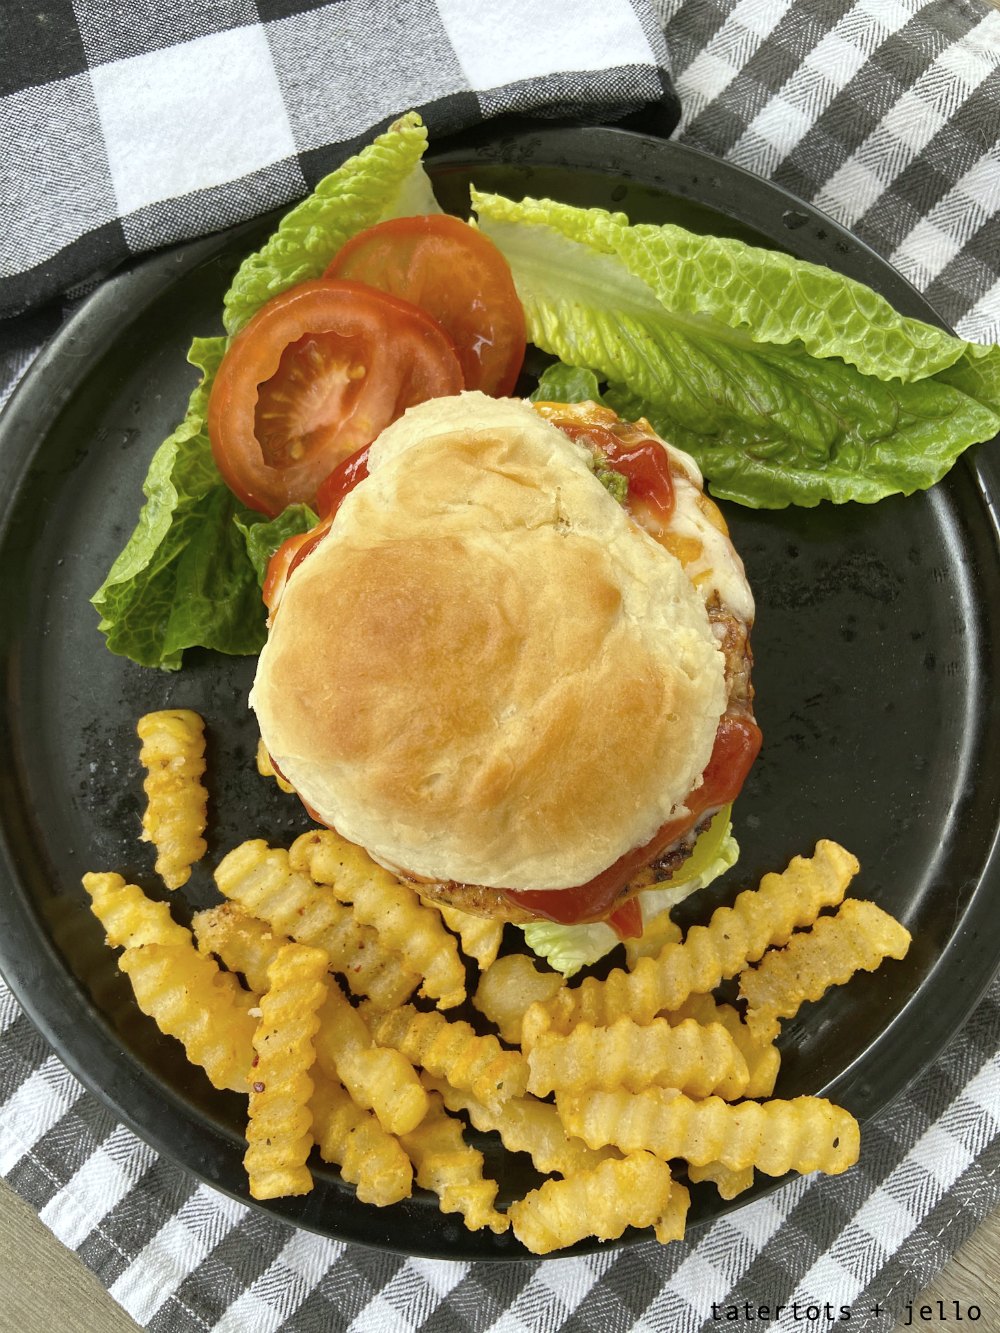 Fast and Easy Homemade Hamburger Buns in Less Than an Hour. Need a quick hamburger bun without having to run to the store? These are easy to make and bake up fluffy and golden brown in less than an hour. 